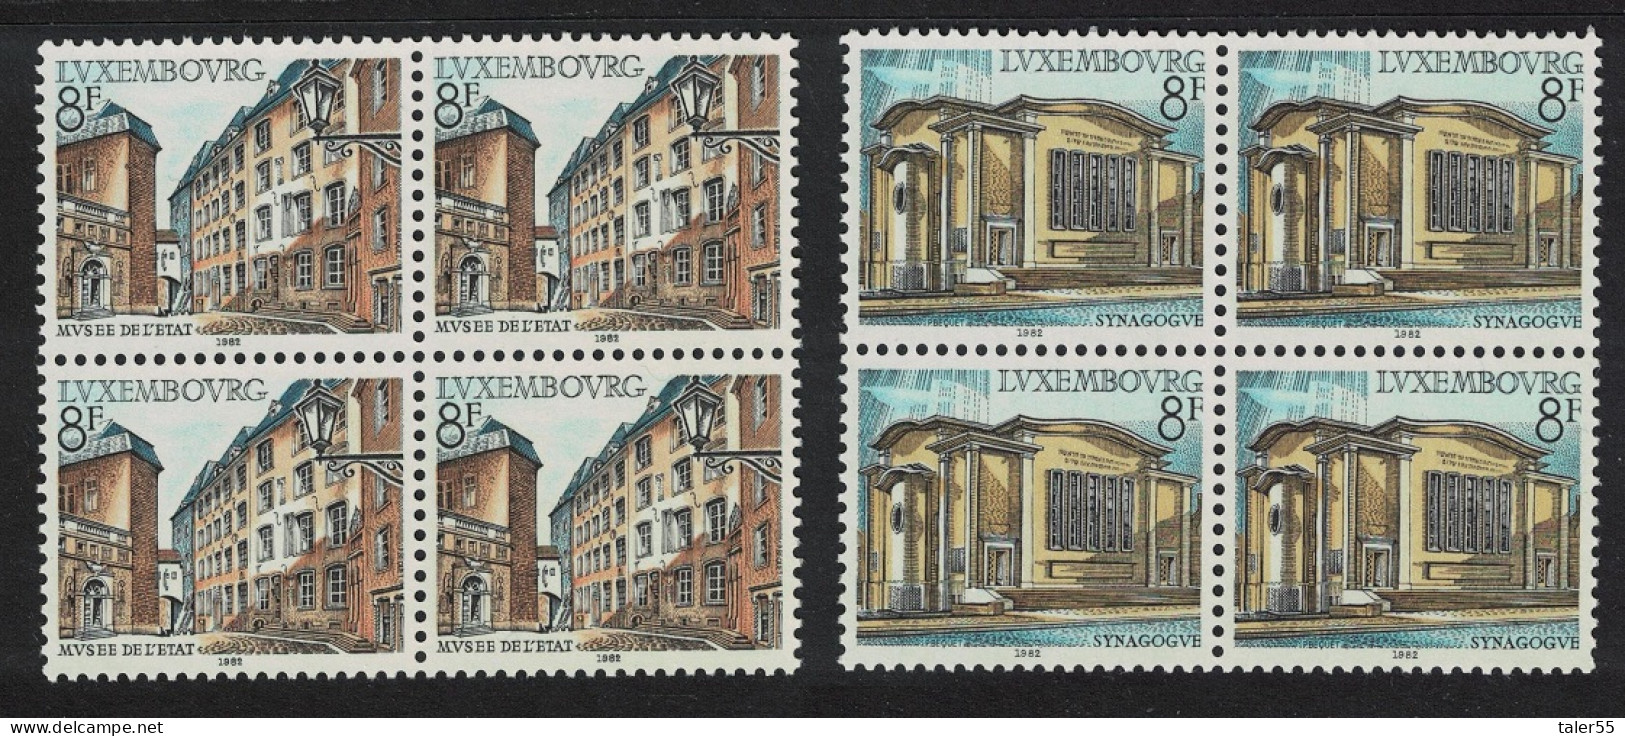 Luxembourg Synagogue State Museum 2v Blocks Of 4 1982 MNH SG#1090-1091 - Neufs